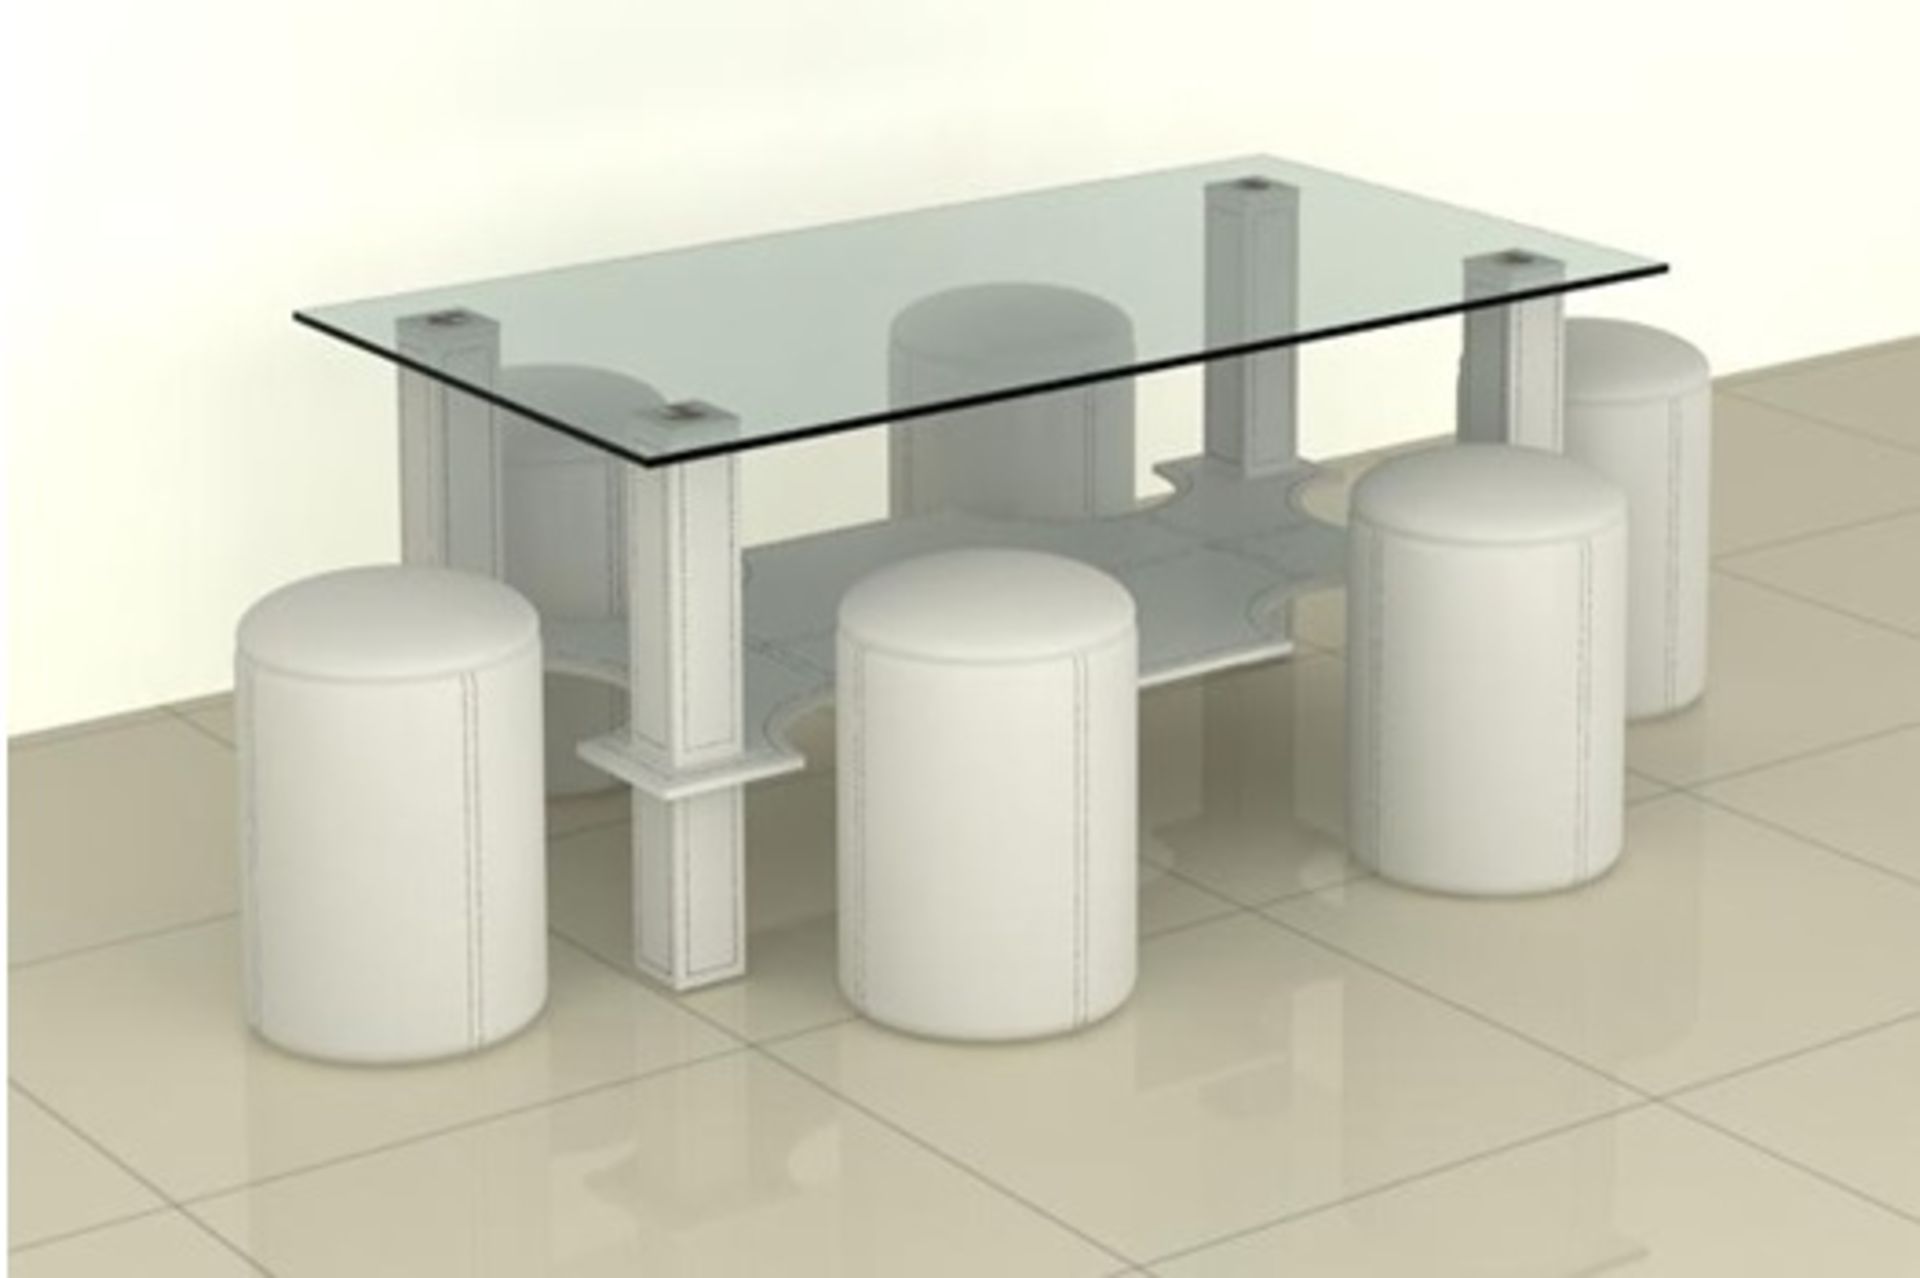 1 x Contemporary Glass Coffee Table with White PU Base and Six Matching Stools - Brand New & Boxed